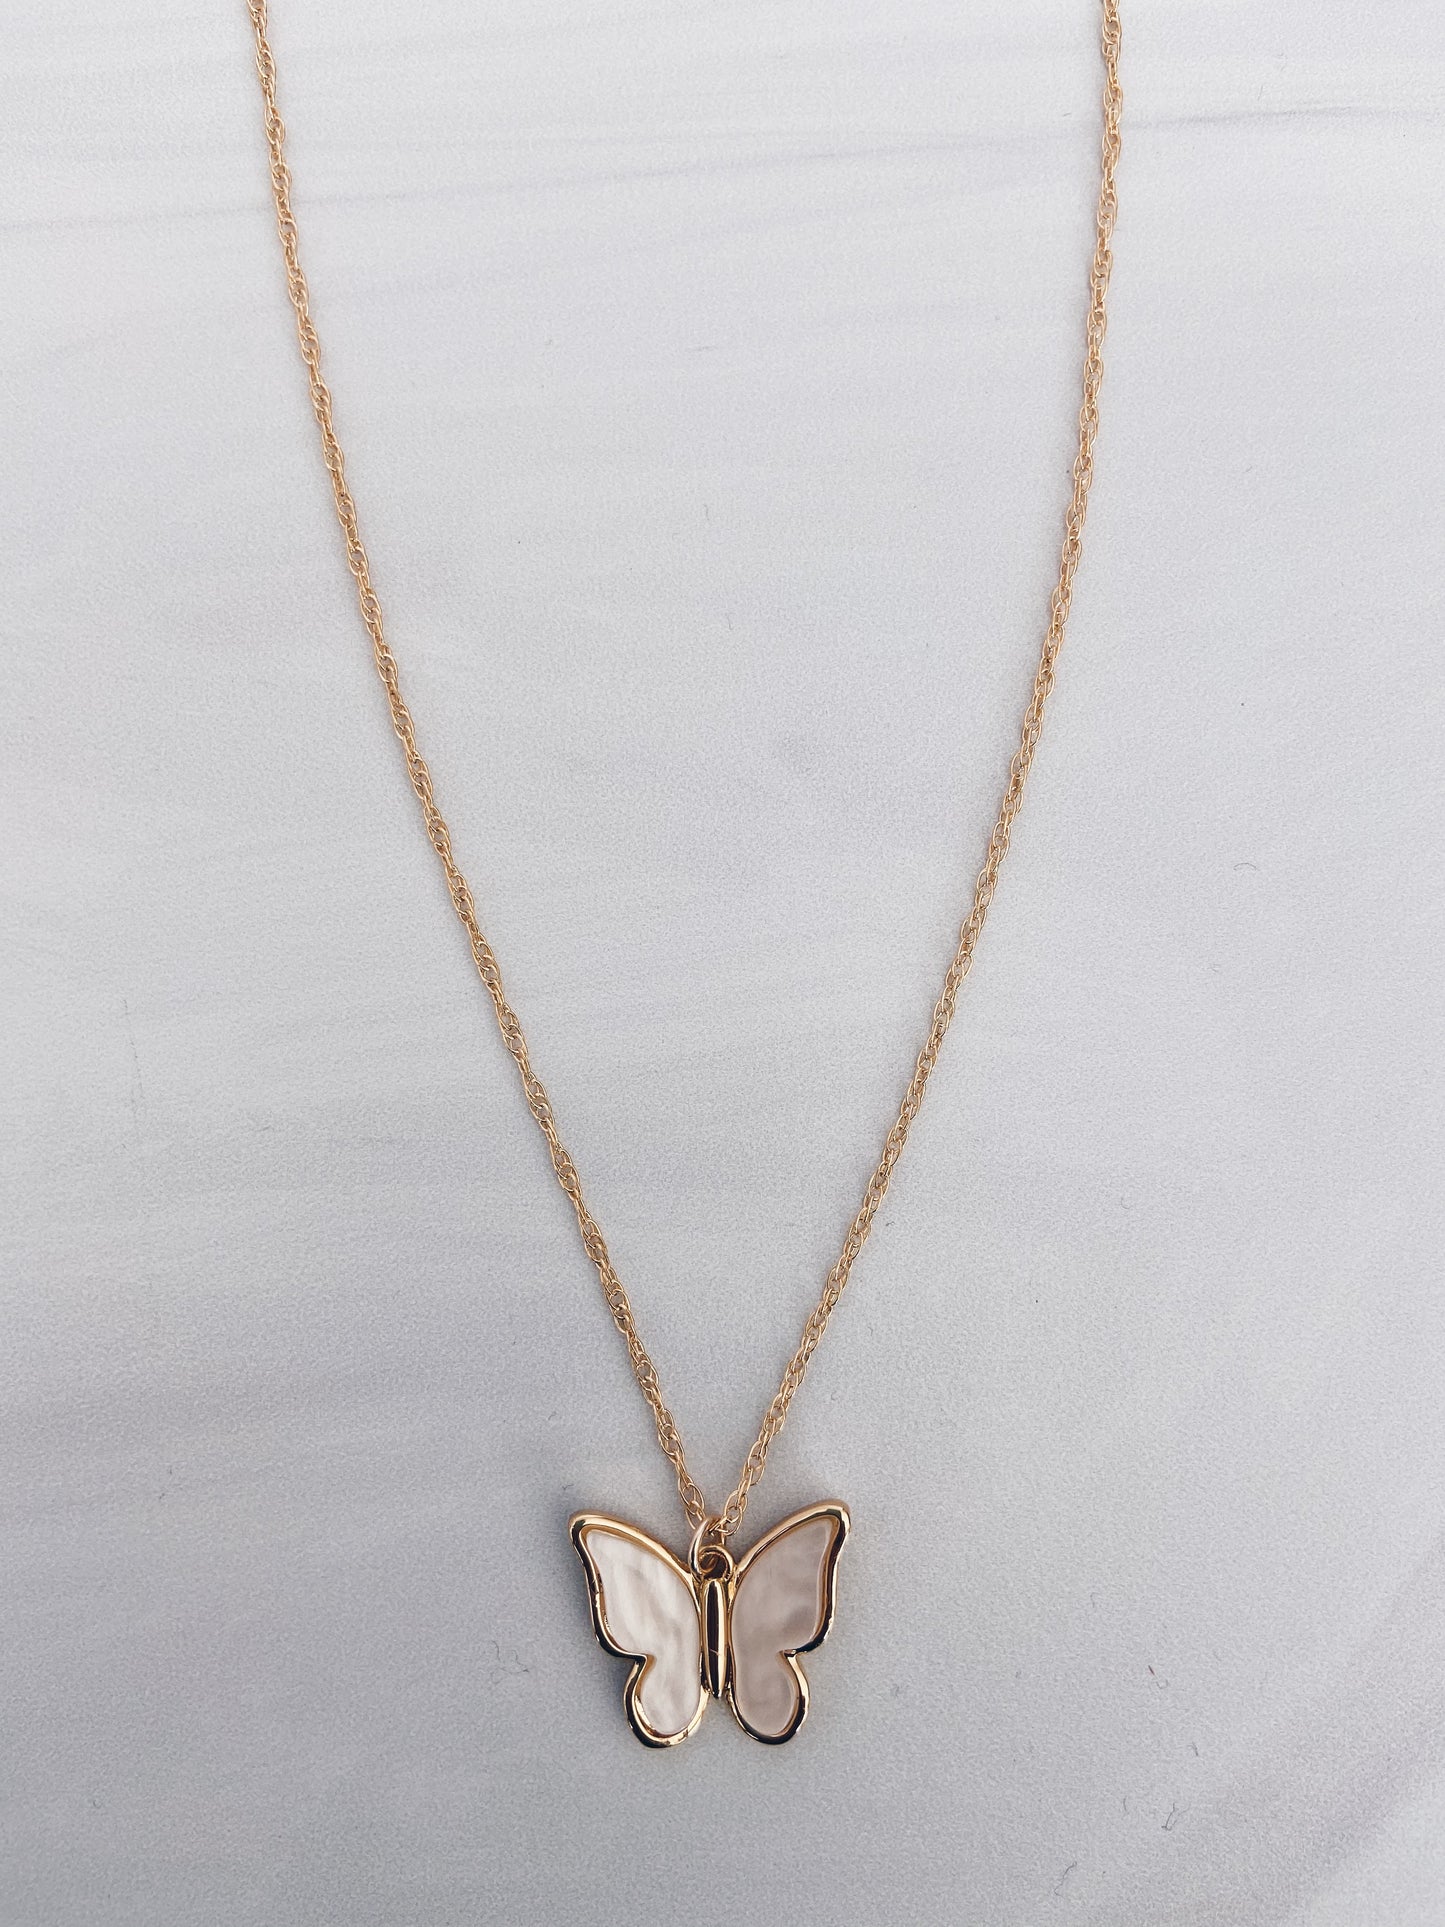 Pearlized Enamel Butterfly Necklace + More Colors